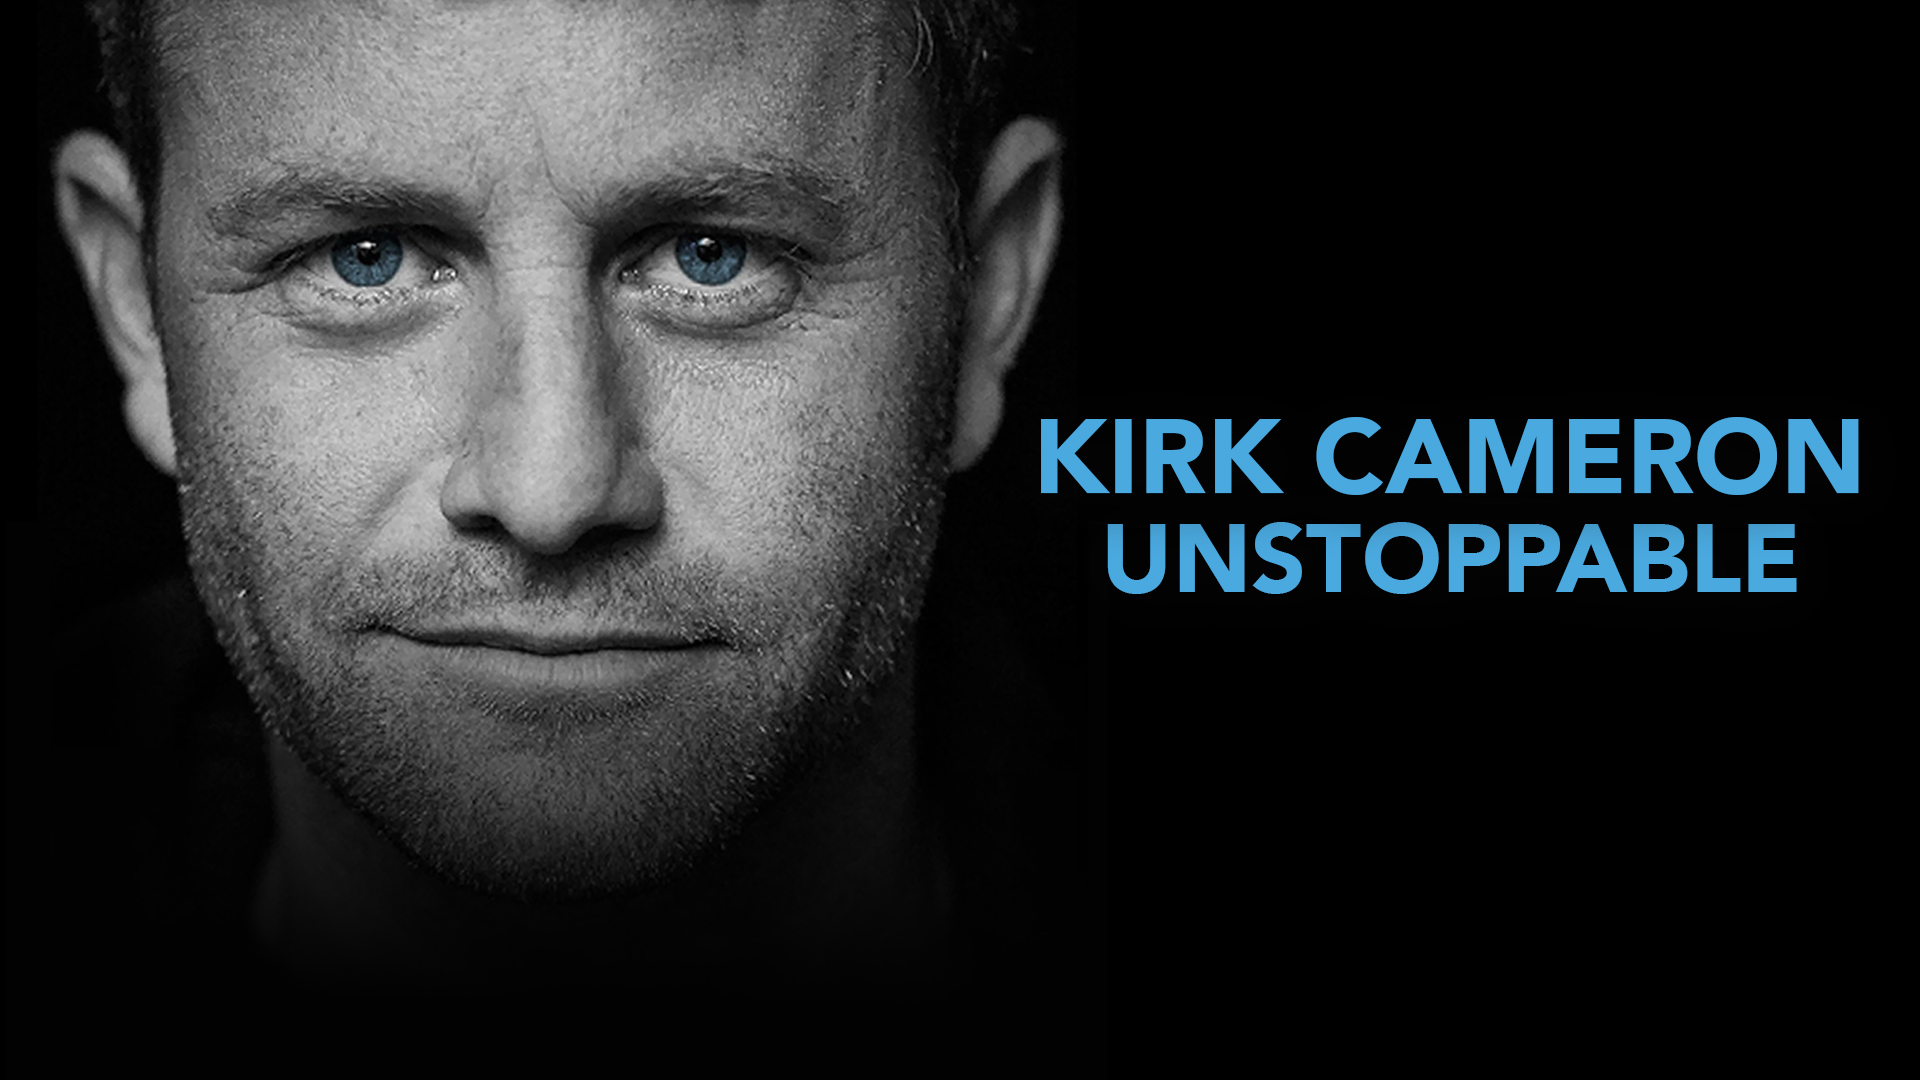 Kirk Cameron: Unstoppable